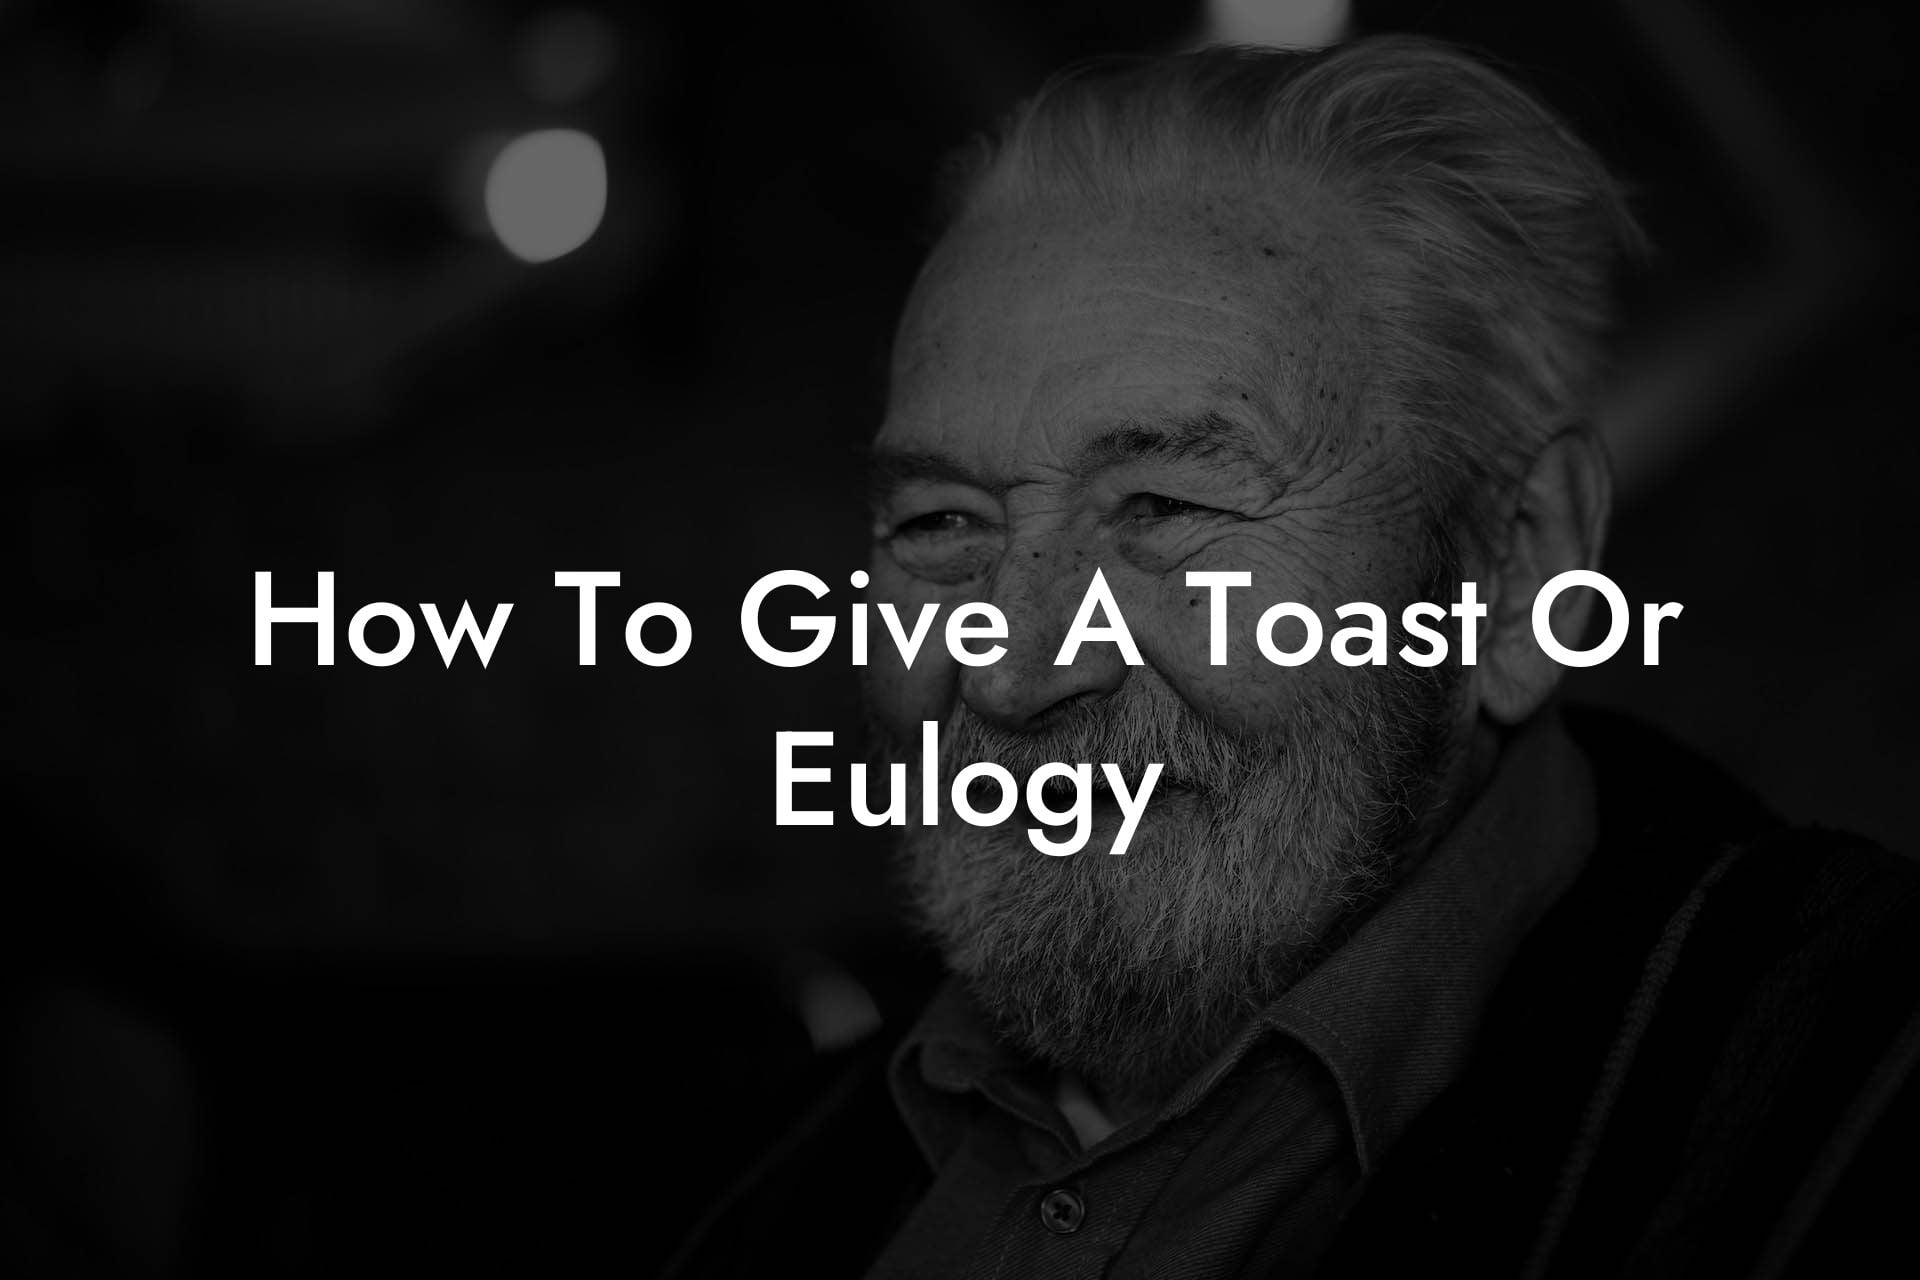 How To Give A Toast Or Eulogy